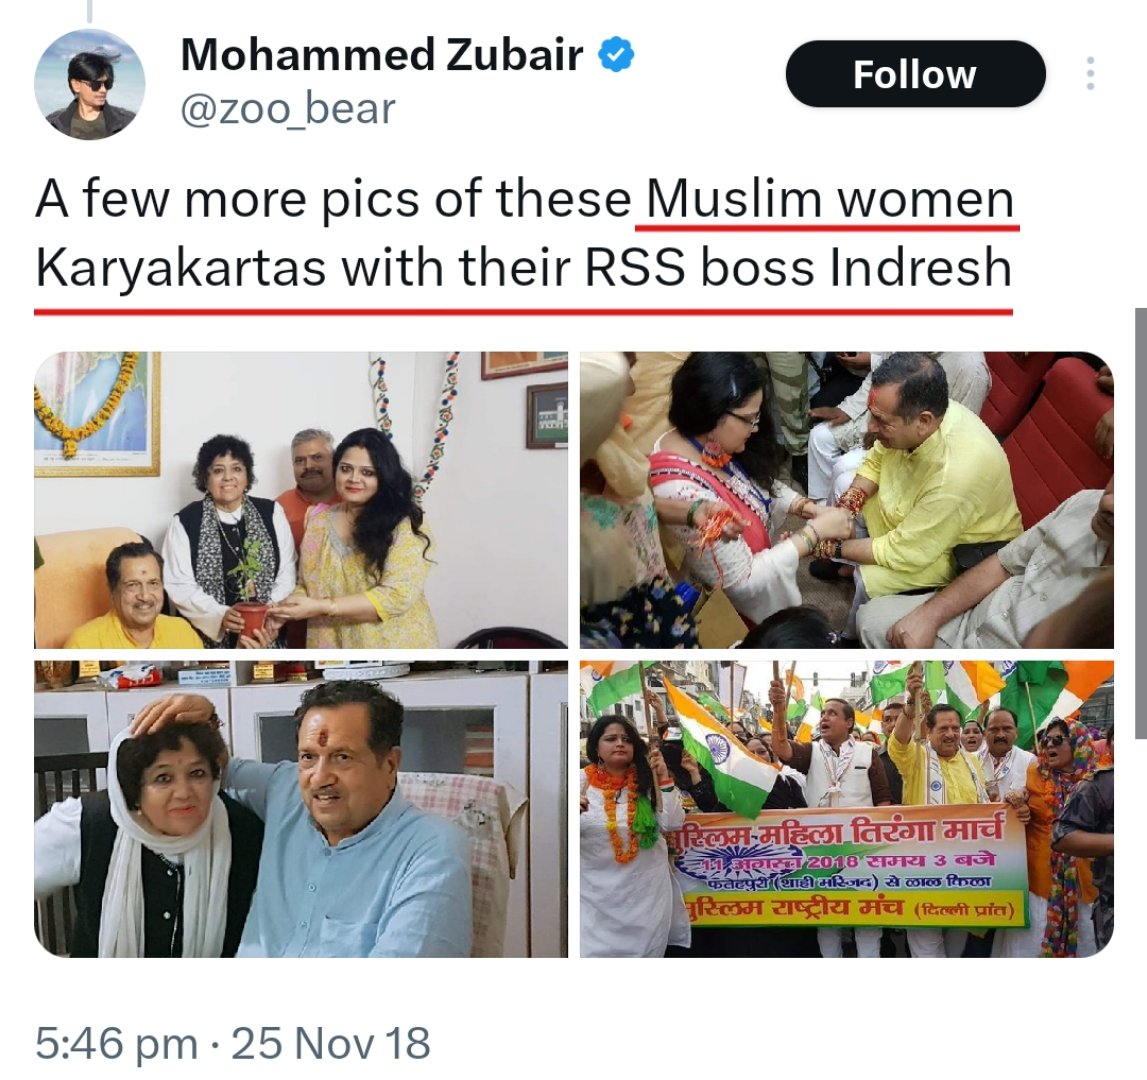 2.
He used the same tactic in 2018, he wanted Jihadi to harass muslim women who were working with RSS leader Indresh Kumar. Otherwise what was the reason Zubair shared pictures of them by mentioning with the RSS boss. He targets them and triggers the public indirectly but knwgly